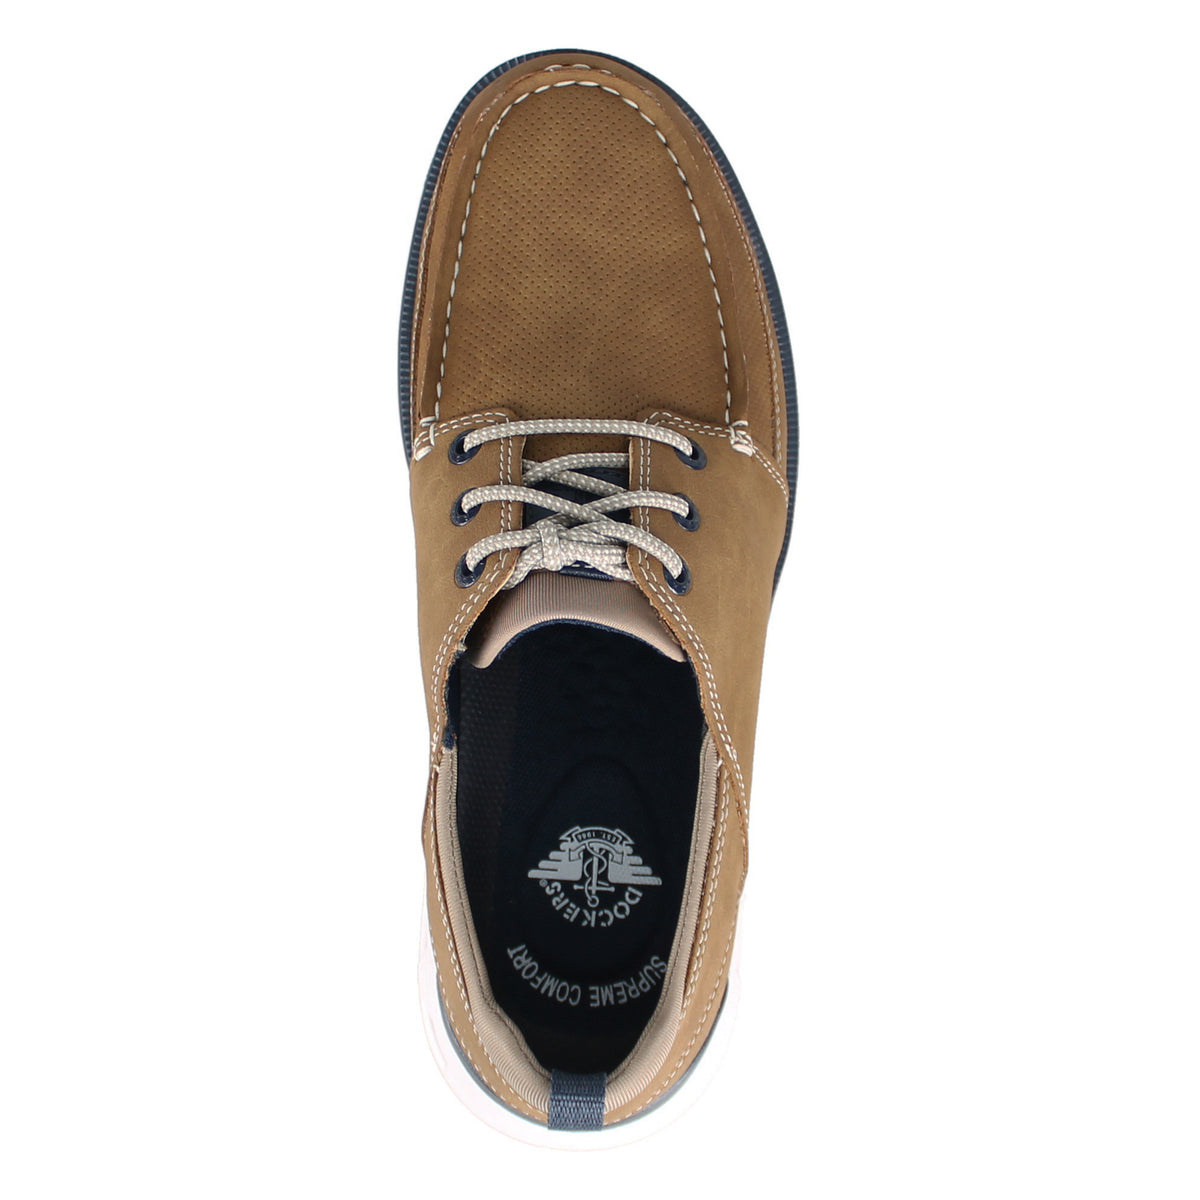 Dockers Shoes Saunders Tan Shoes